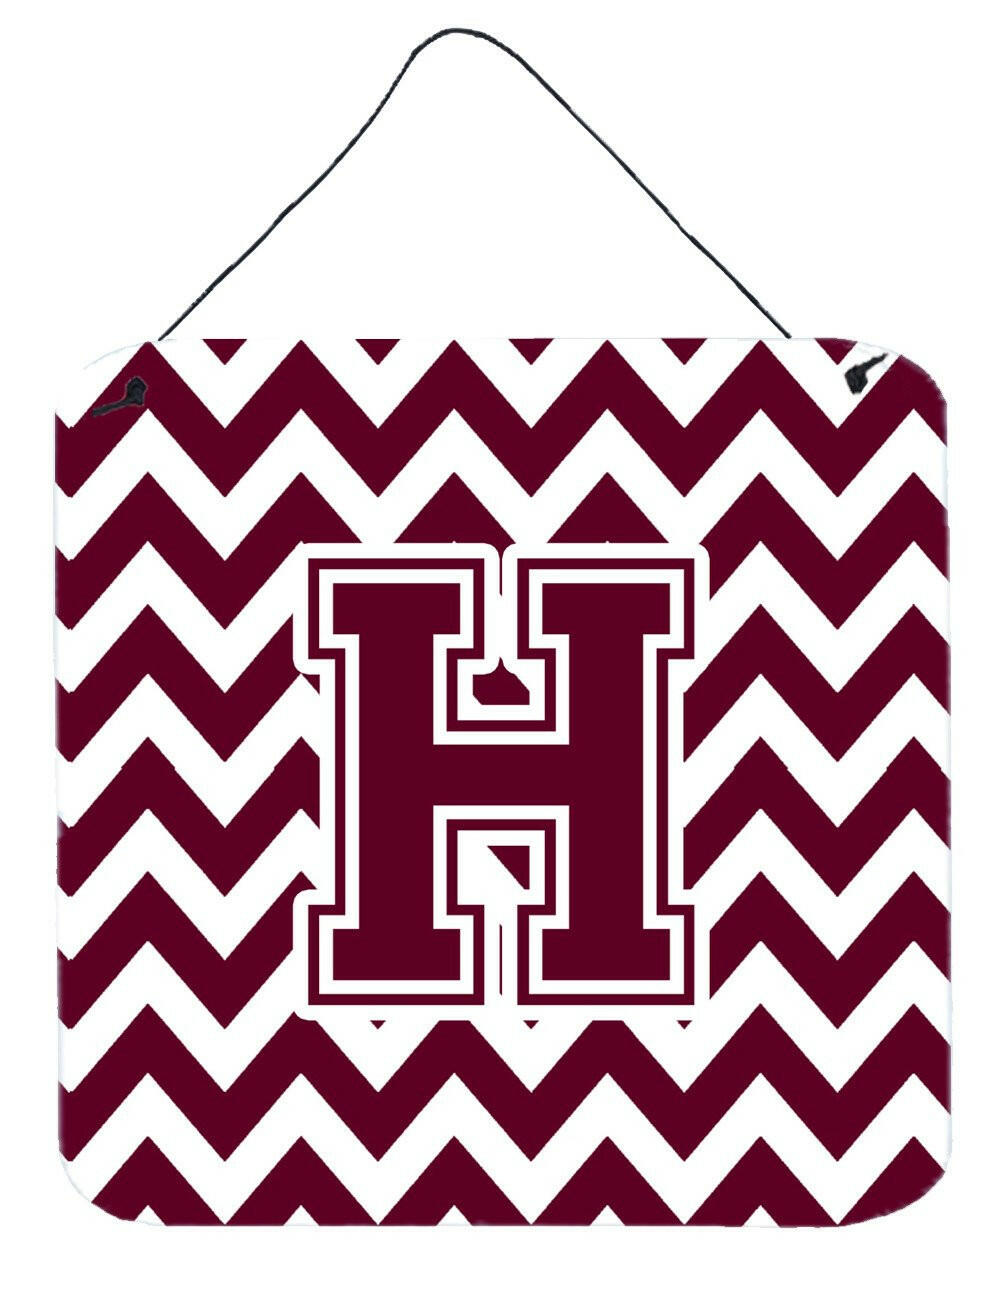 Letter H Chevron Maroon and White  Wall or Door Hanging Prints CJ1051-HDS66 by Caroline's Treasures